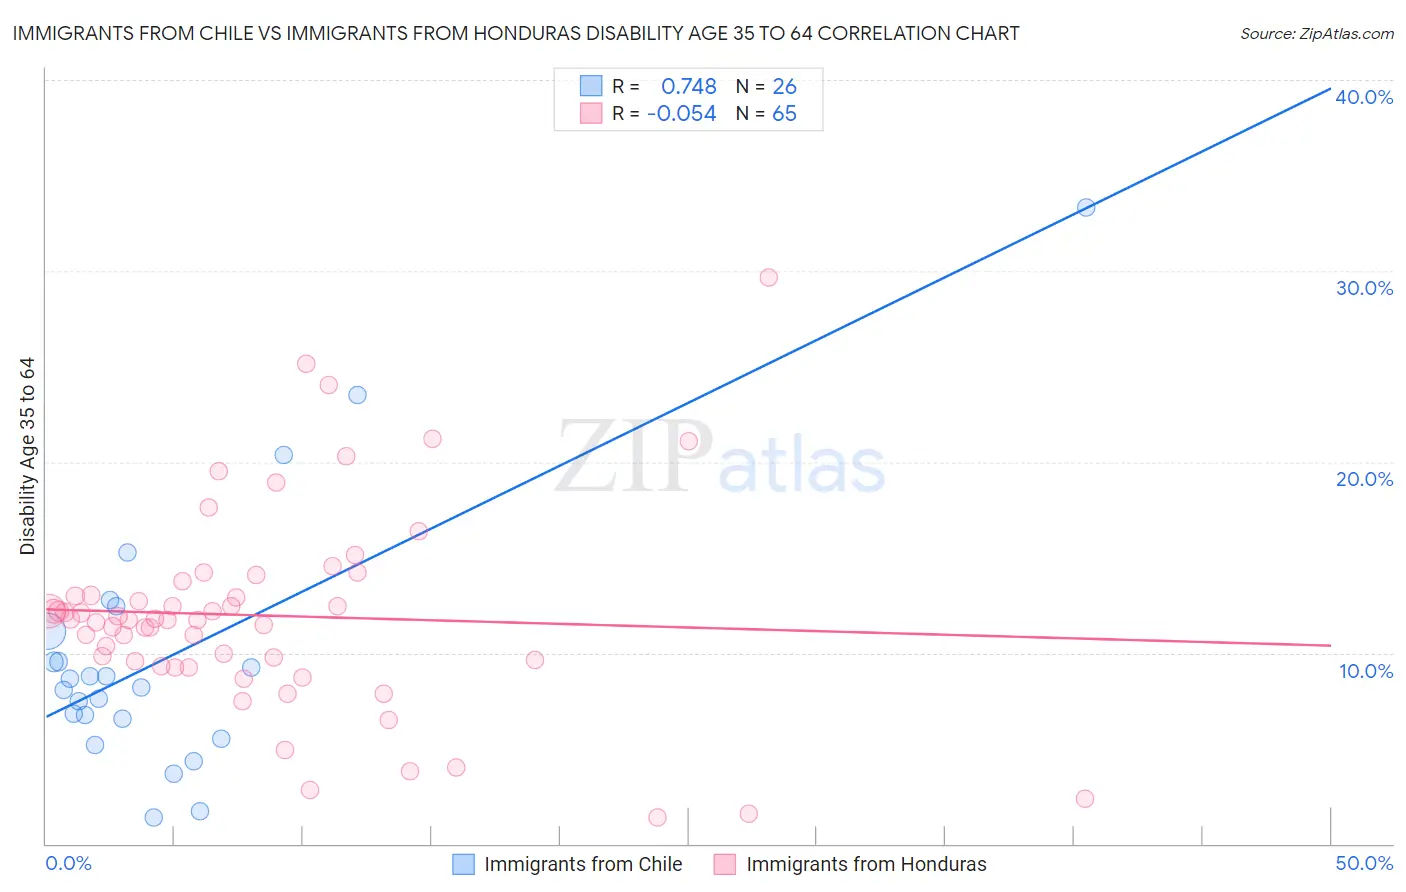 Immigrants from Chile vs Immigrants from Honduras Disability Age 35 to 64